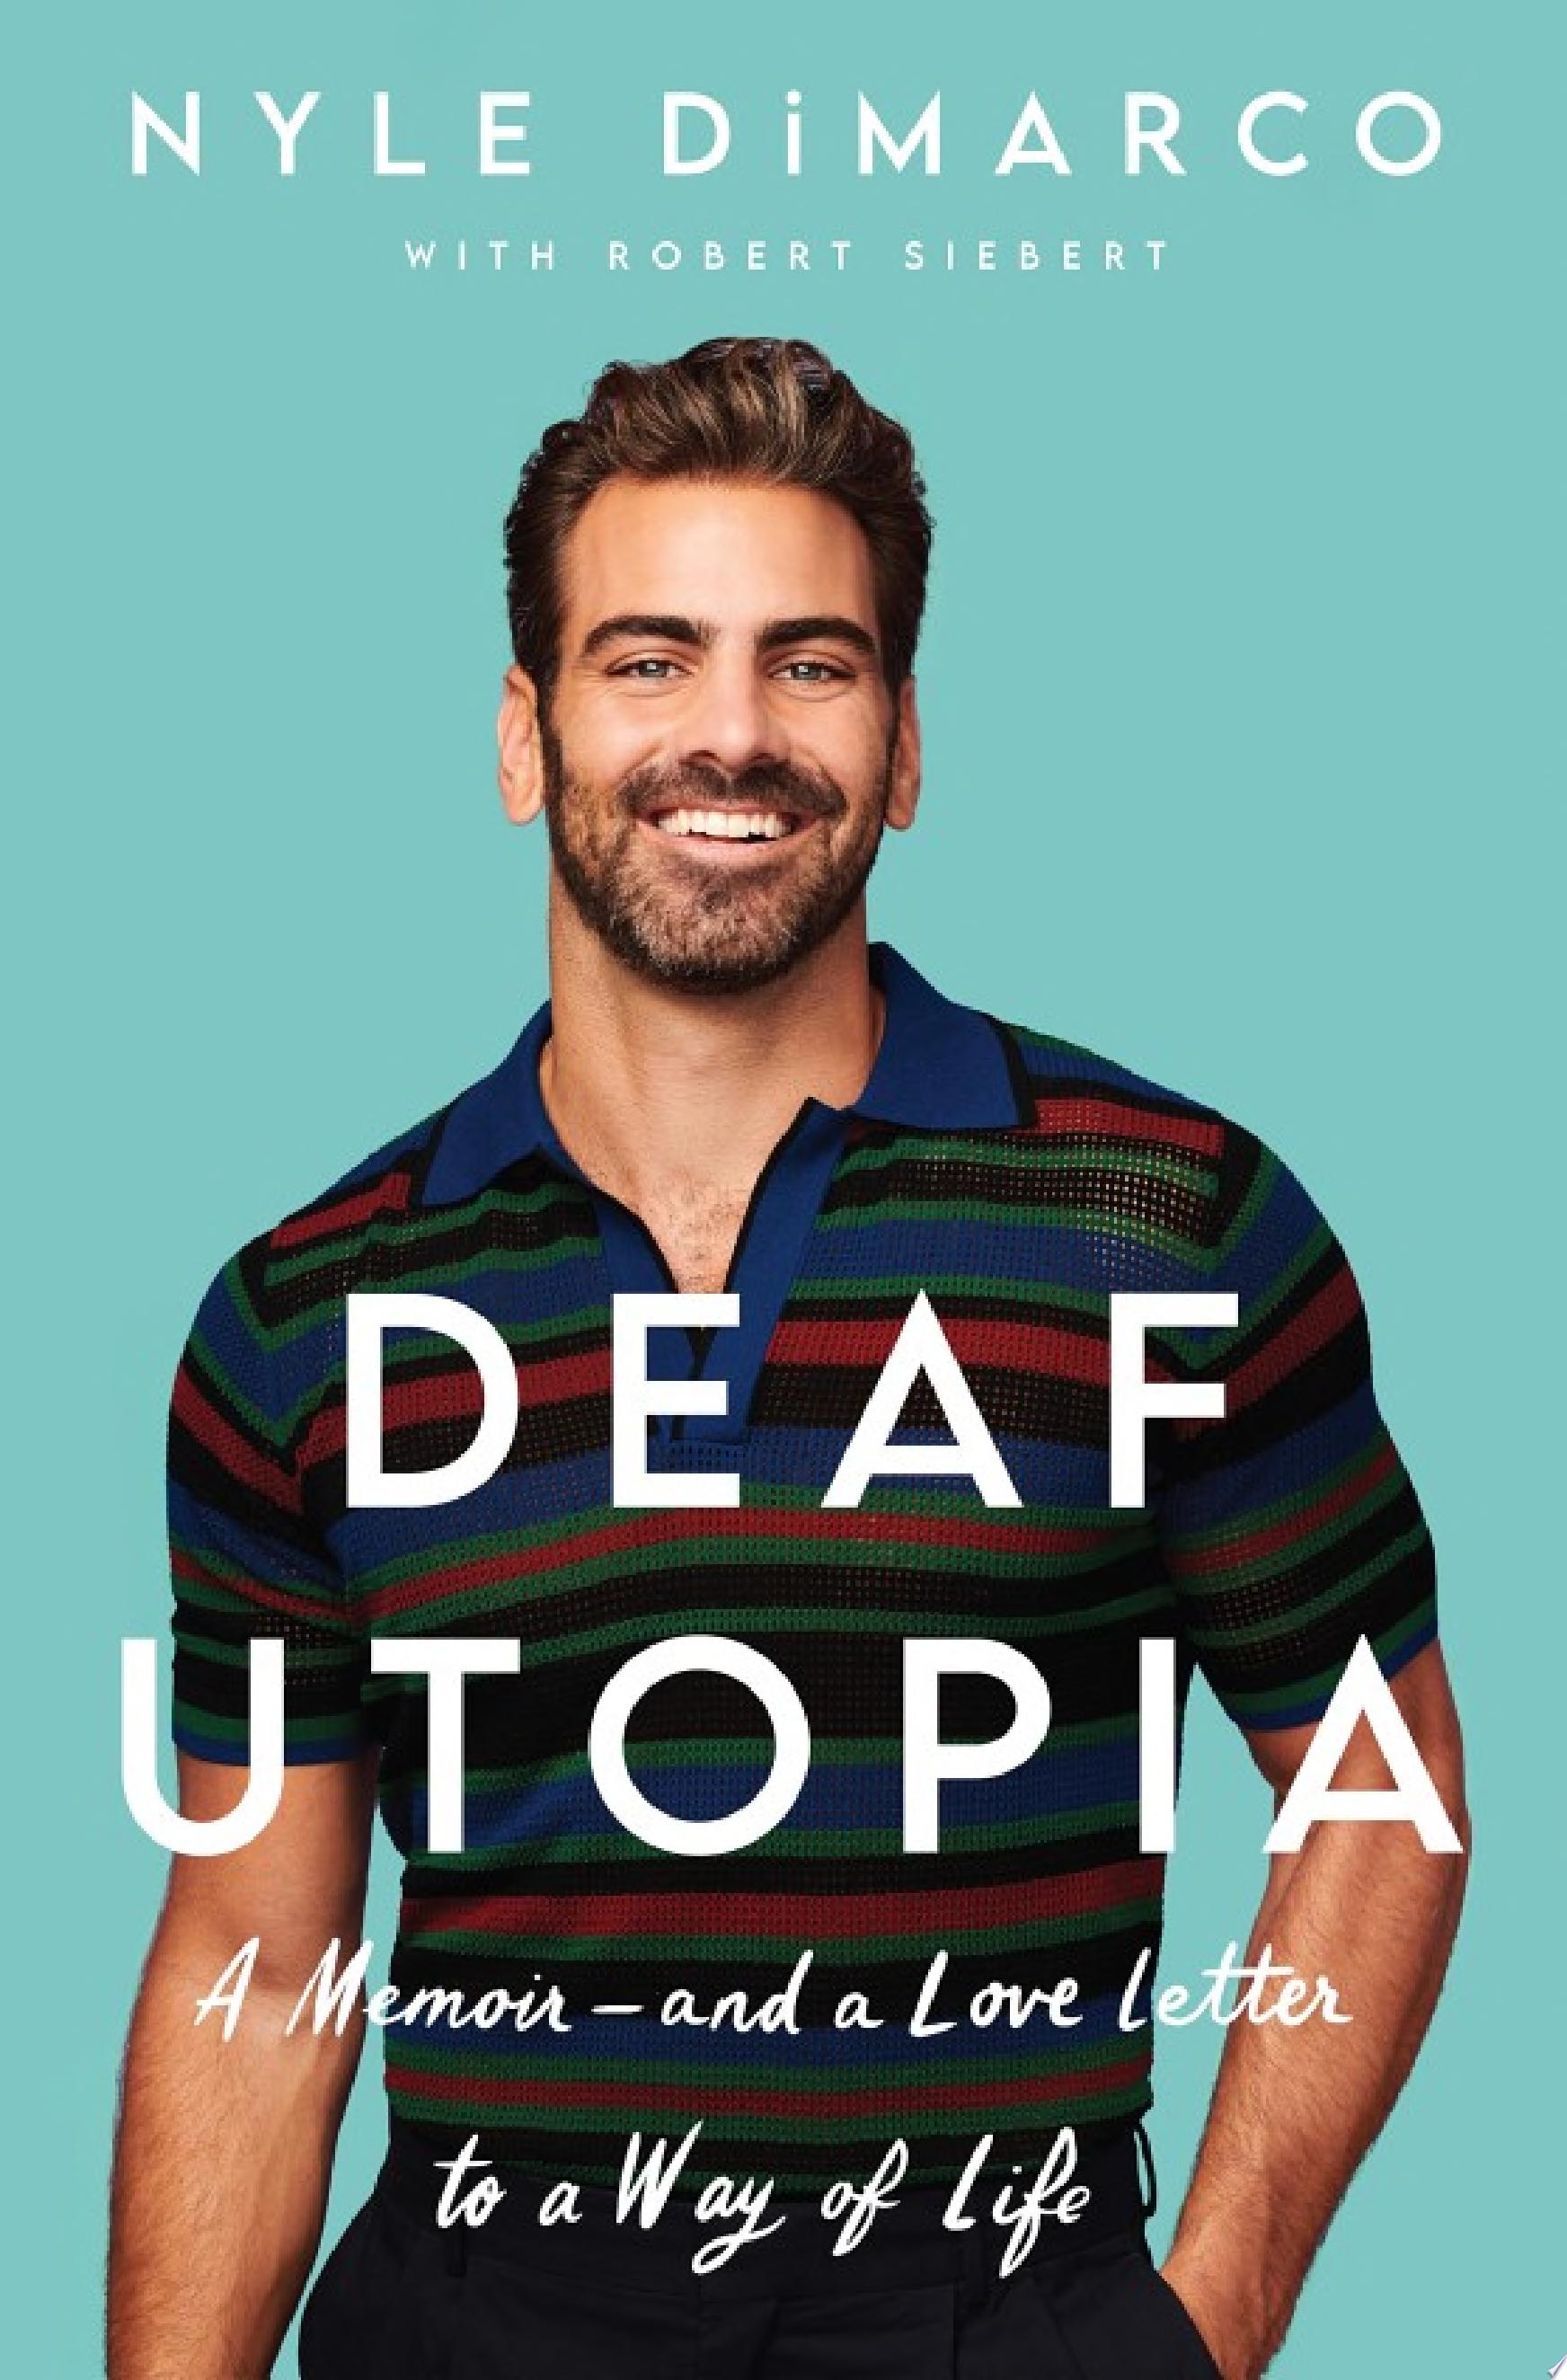 Image for "Deaf Utopia"